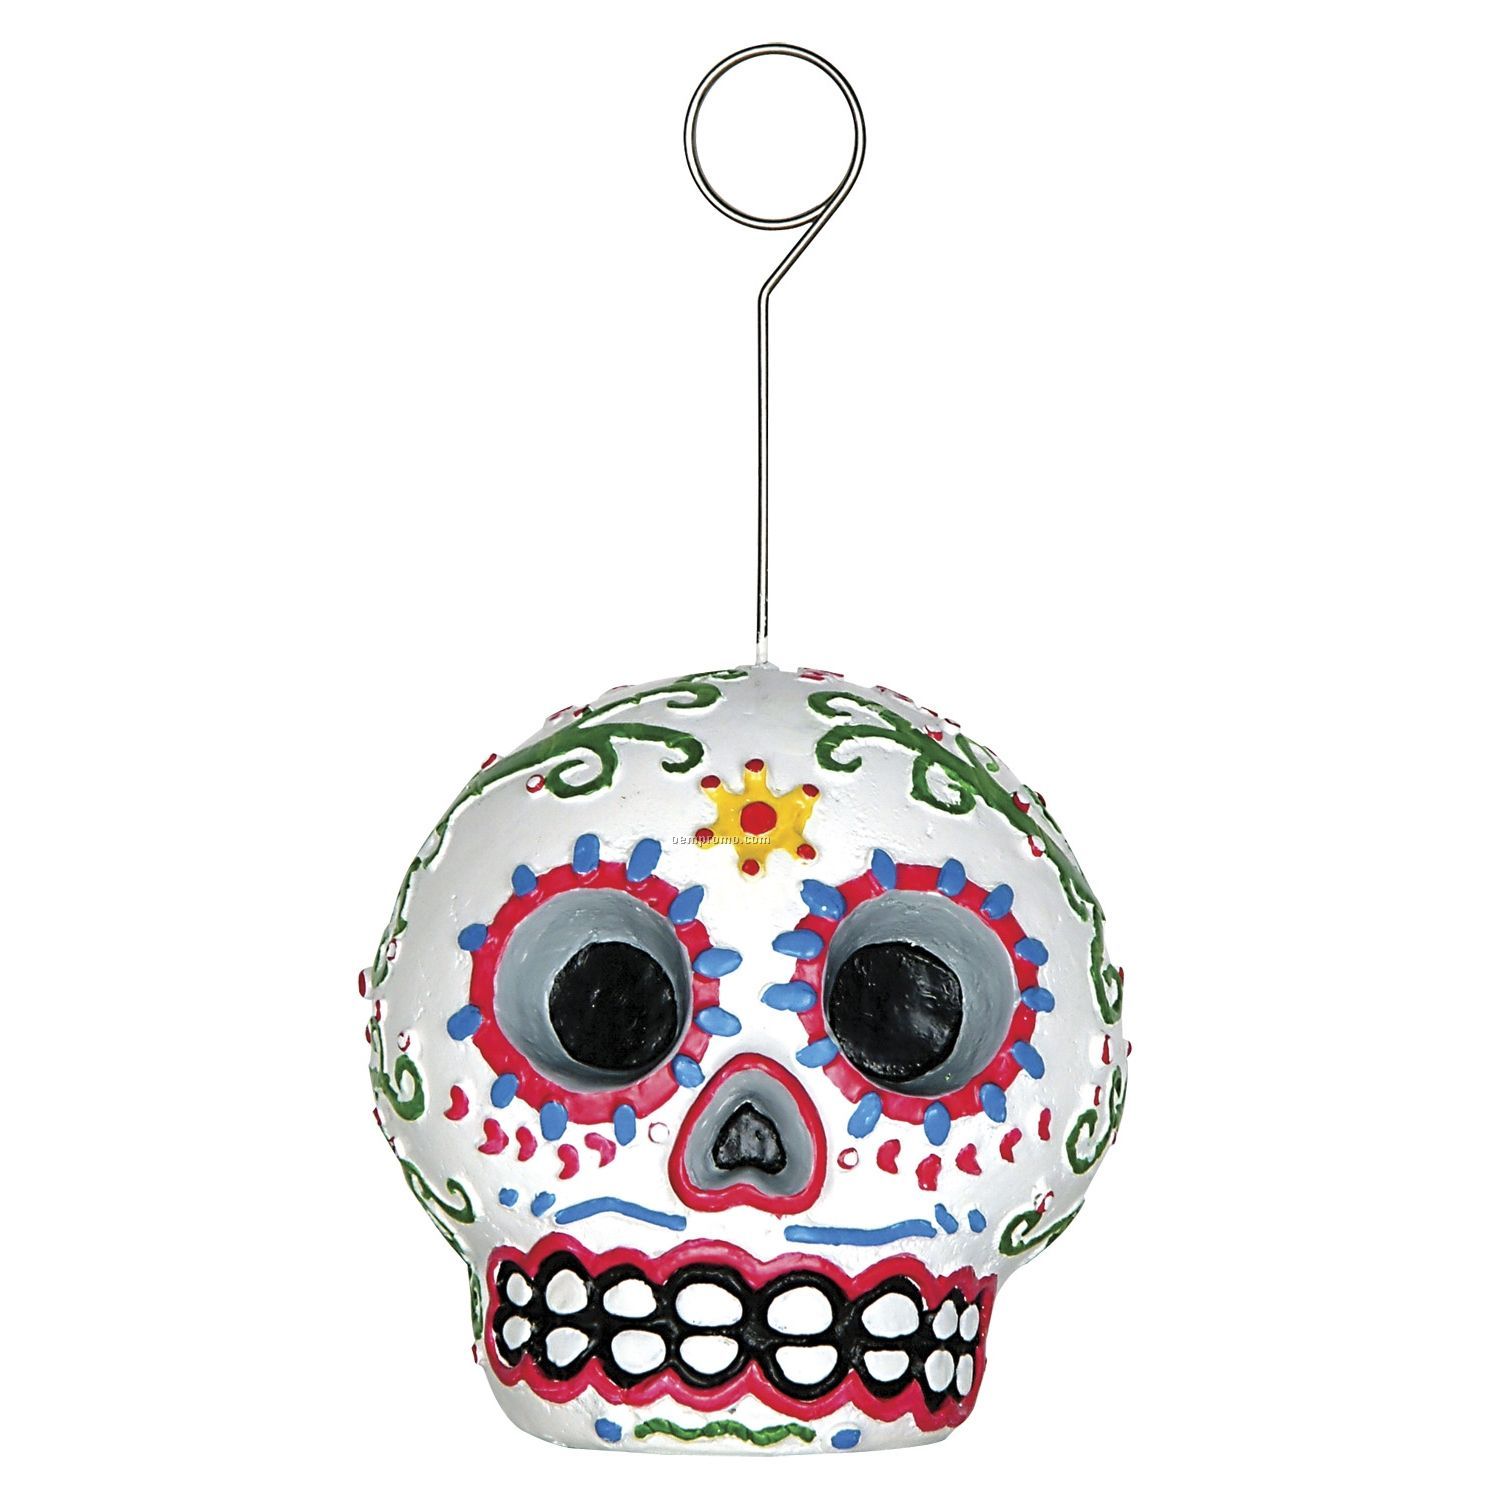 Day Of The Dead Male Skull Photo/ Balloon Holder